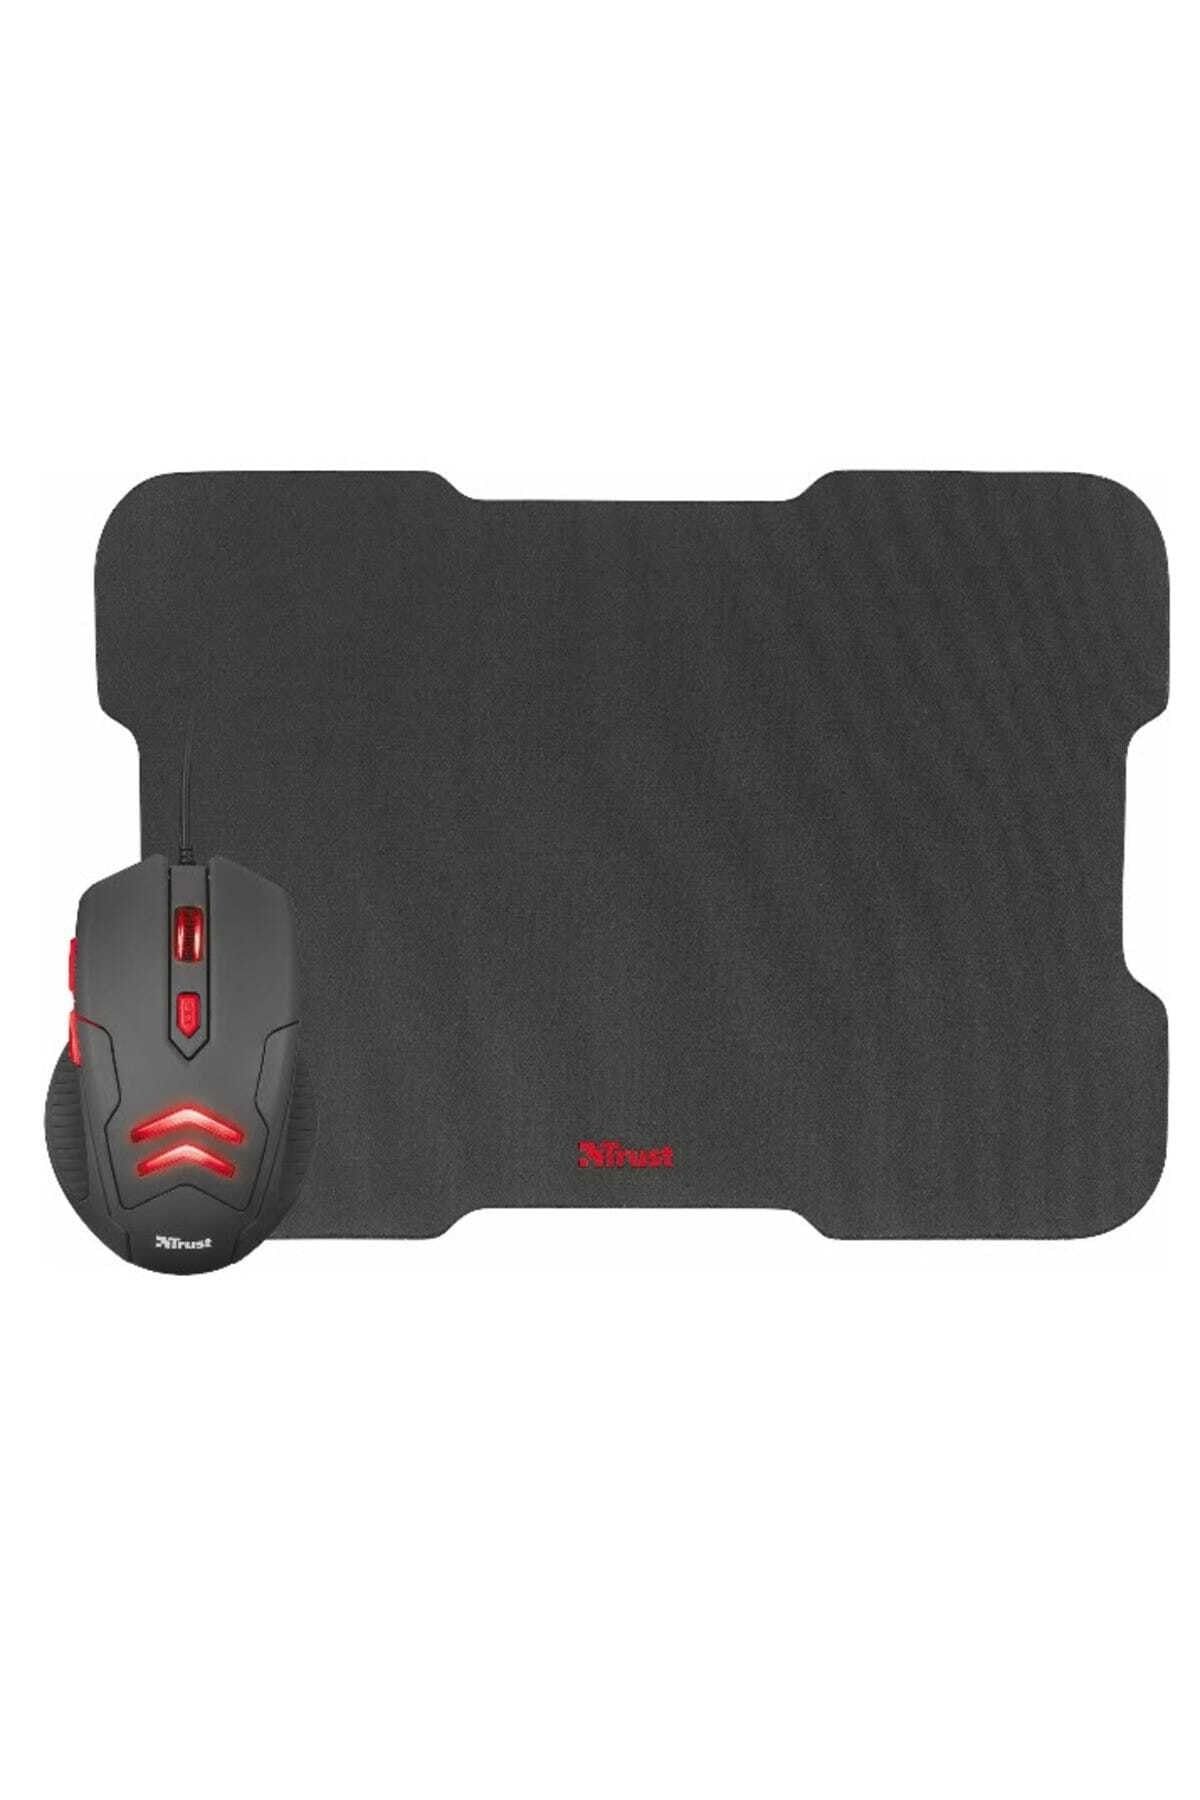 Trust Ziva 21963 Gaming Oyuncu Mouse + Mouse Pad